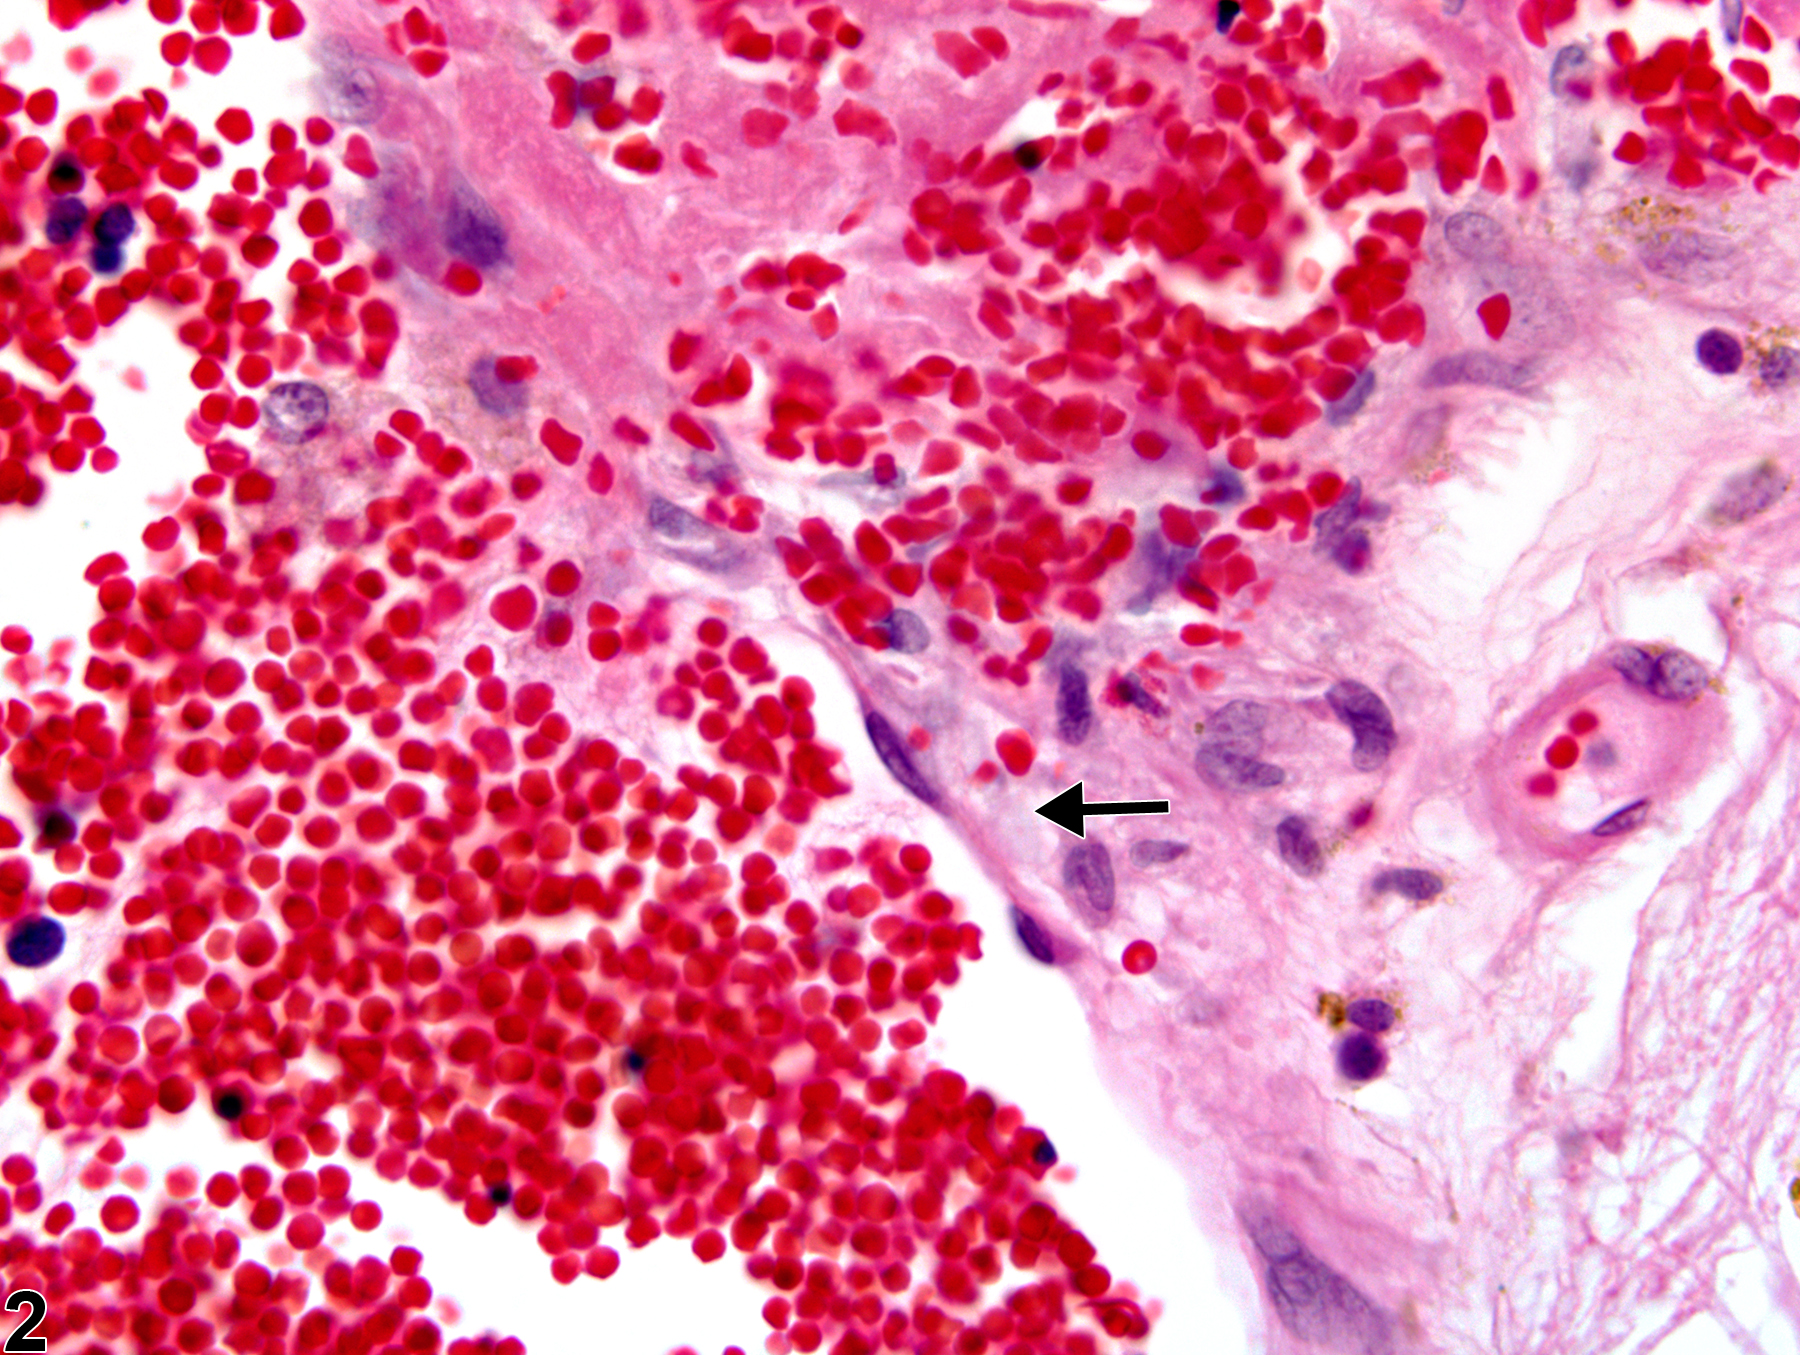 Image of angiectasis in the brain from a female F344/N rat in a chronic study